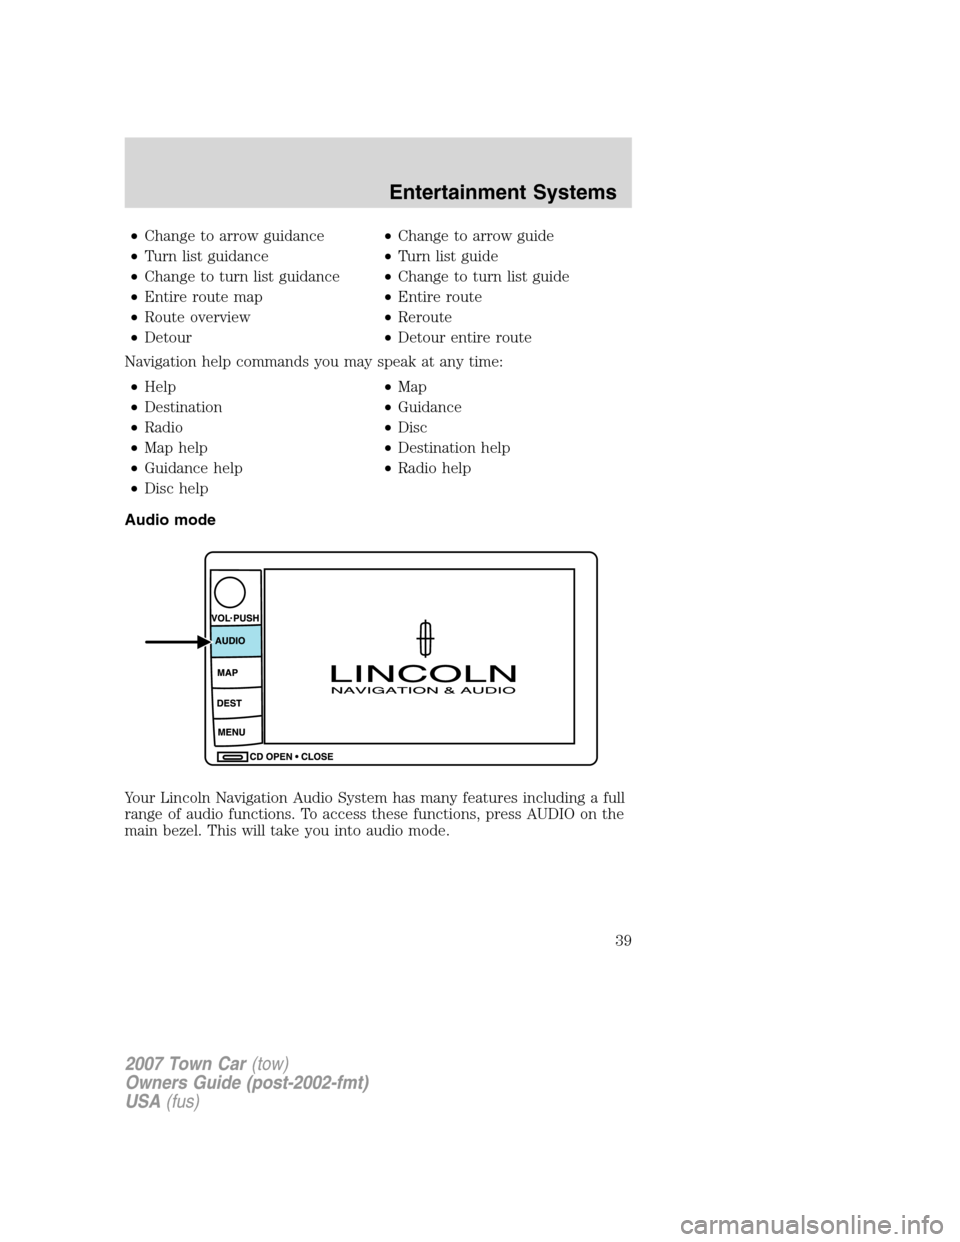 LINCOLN TOWN CAR 2007 Owners Guide •Change to arrow guidance•Change to arrow guide
•Turn list guidance•Turn list guide
•Change to turn list guidance•Change to turn list guide
•Entire route map•Entire route
•Route over